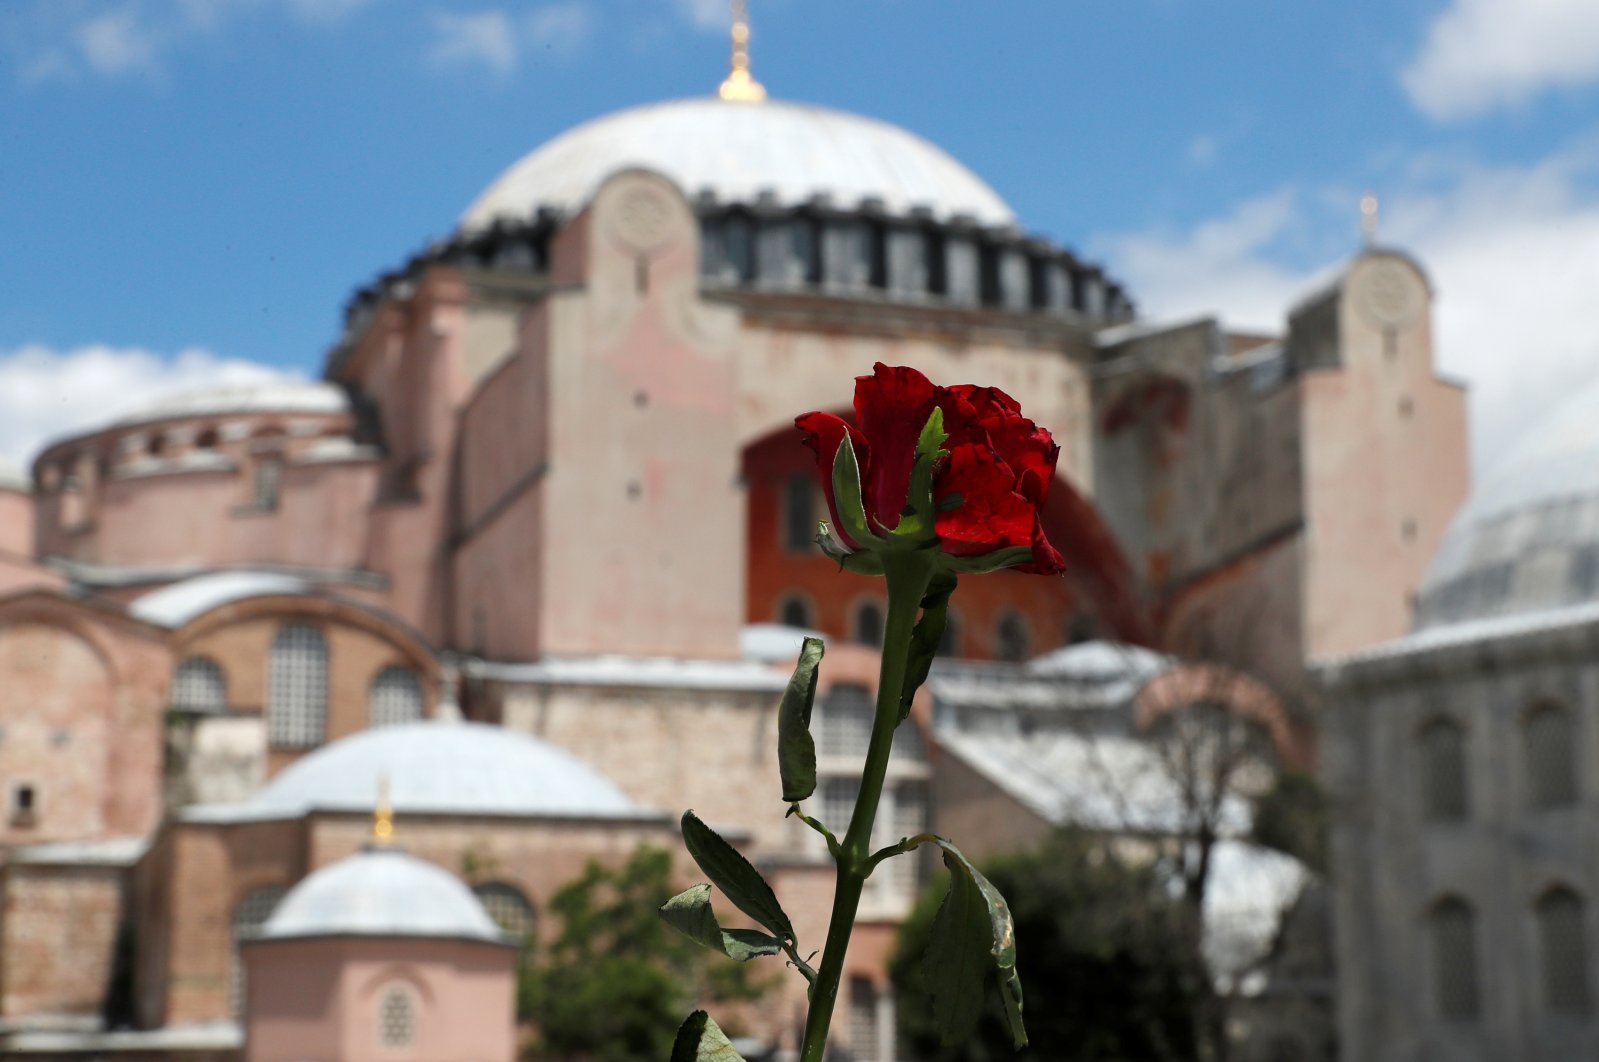 A red rose is attached to the security barriers in front of the Hagia Sophia in Istanbul, July 17, 2020. (REUTERS)